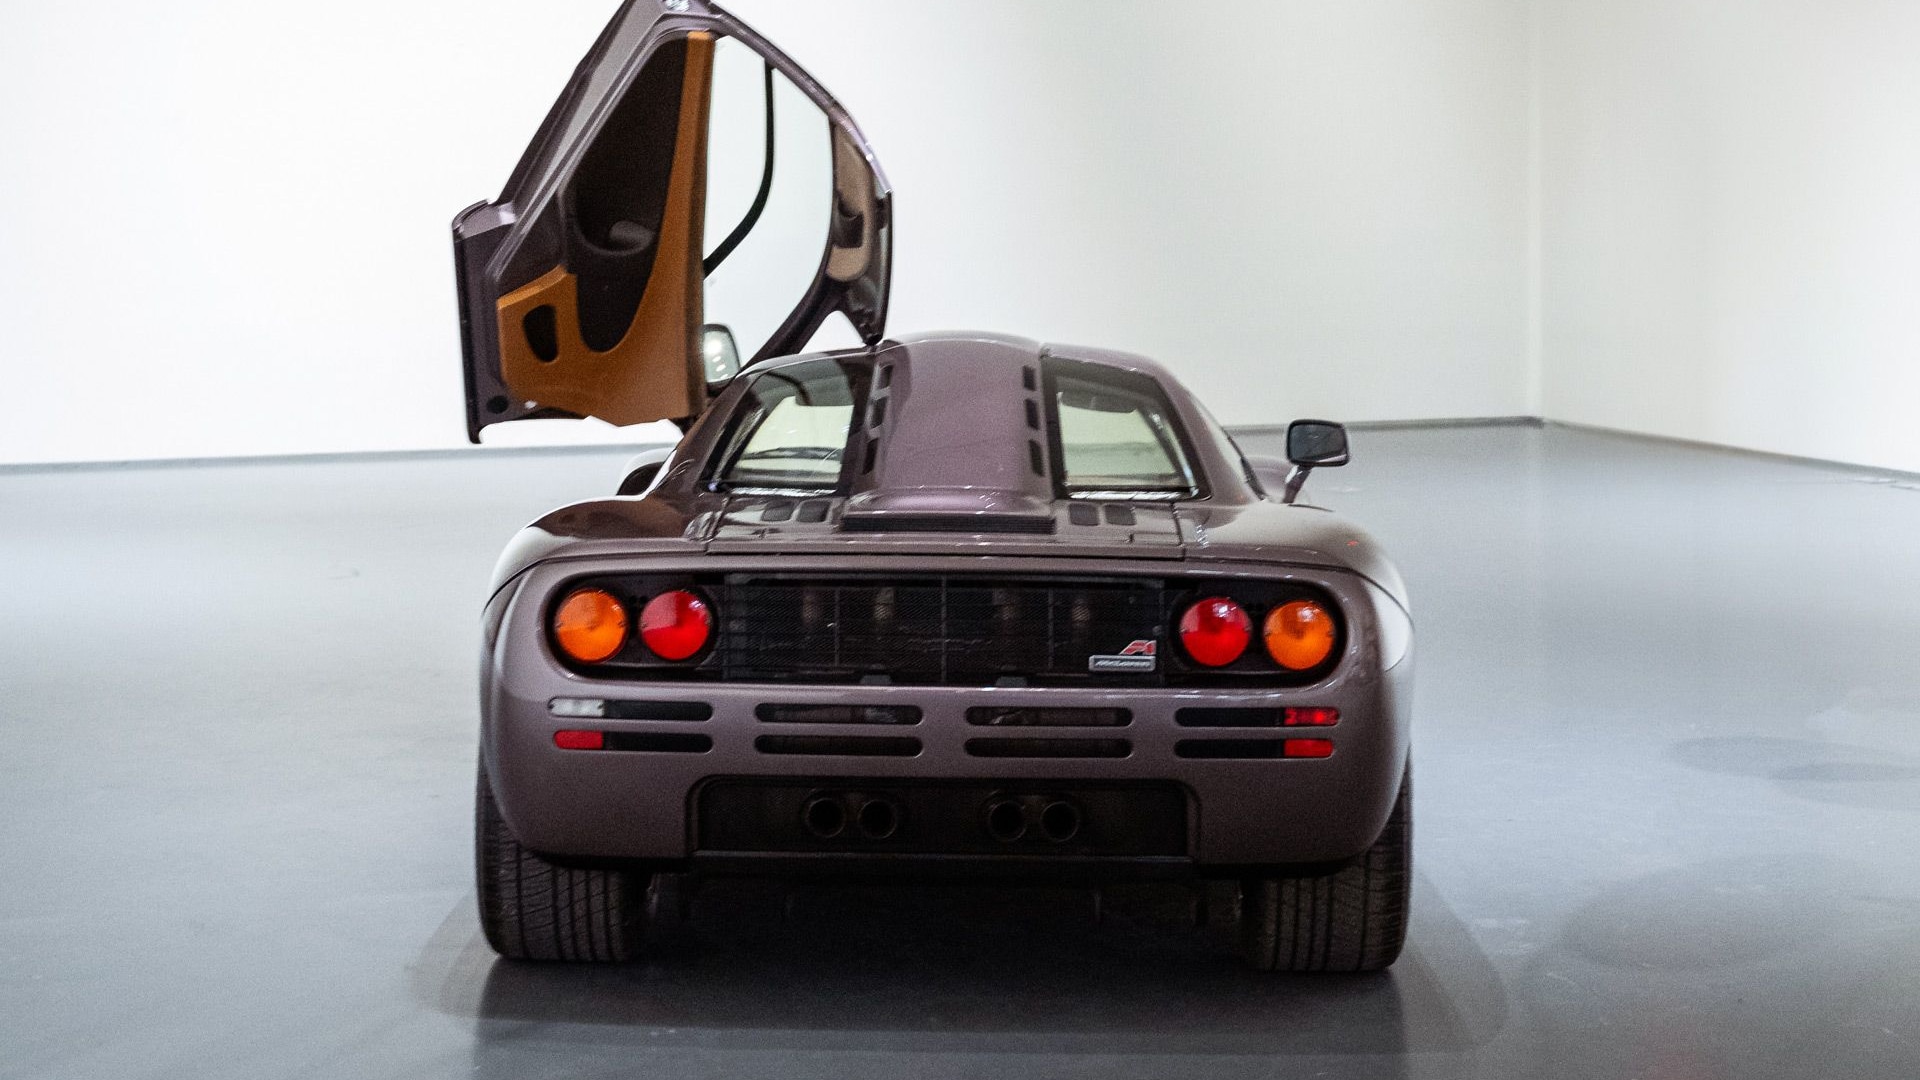 McLaren F1 bearing chassis no. 029 - Photo credit: RM Sotheby's